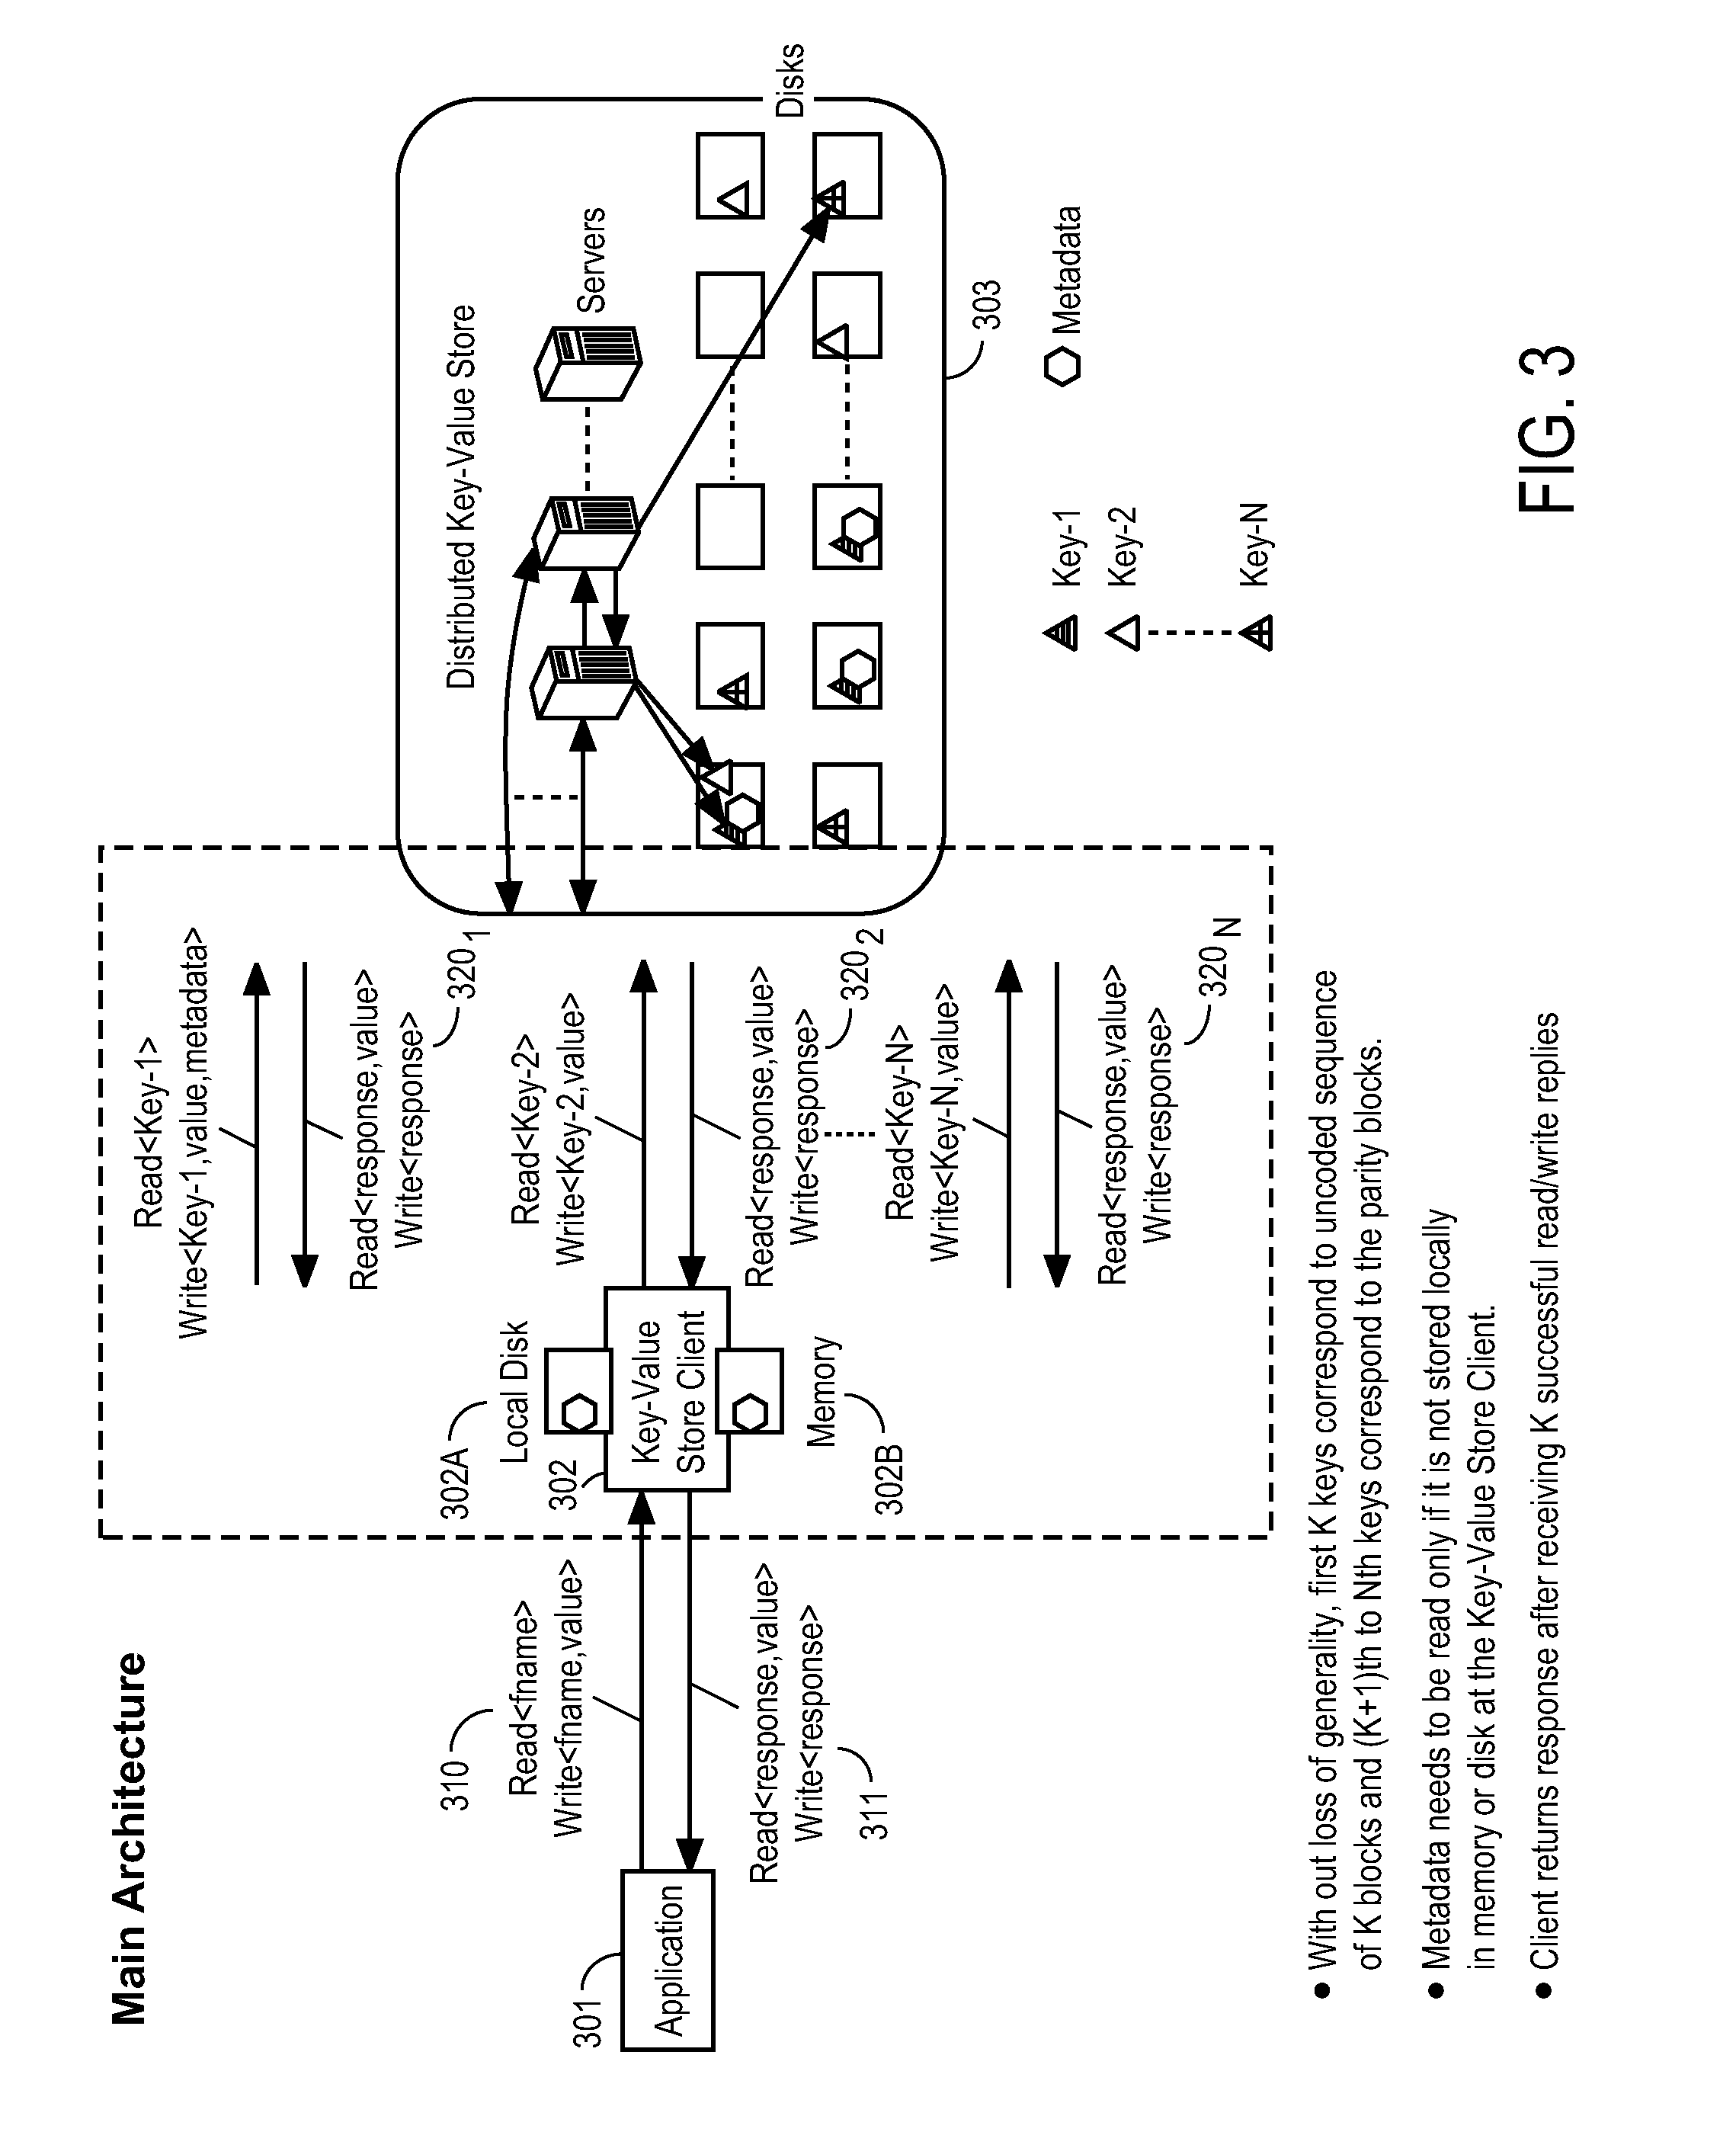 Method and apparatus for low delay access to key-value based storage systems using fec techniques